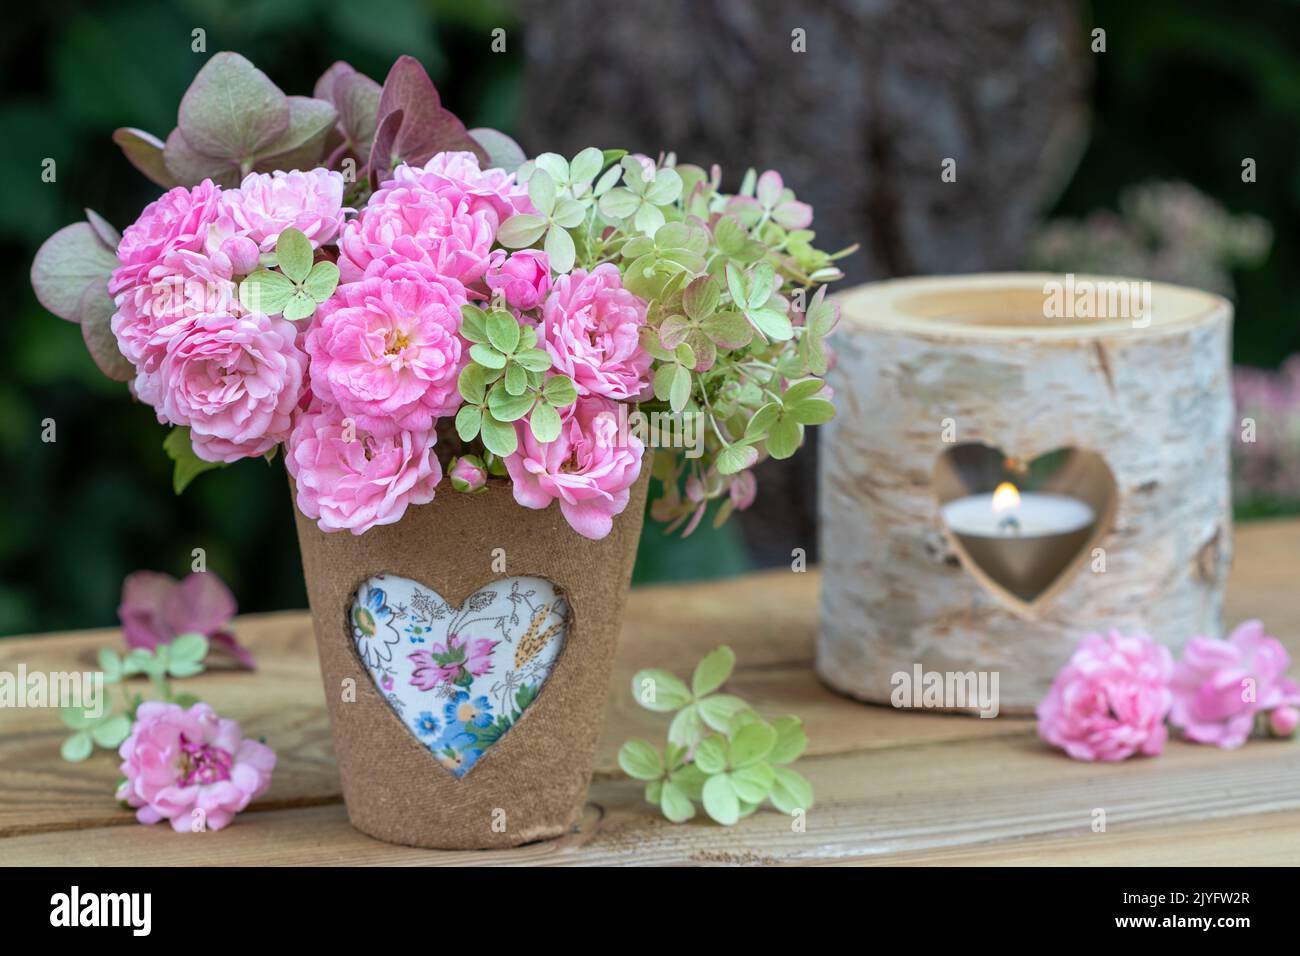 arrangement with bouquet of pink roses and hydrangea flowers and table lantern with heart ornament Stock Photo